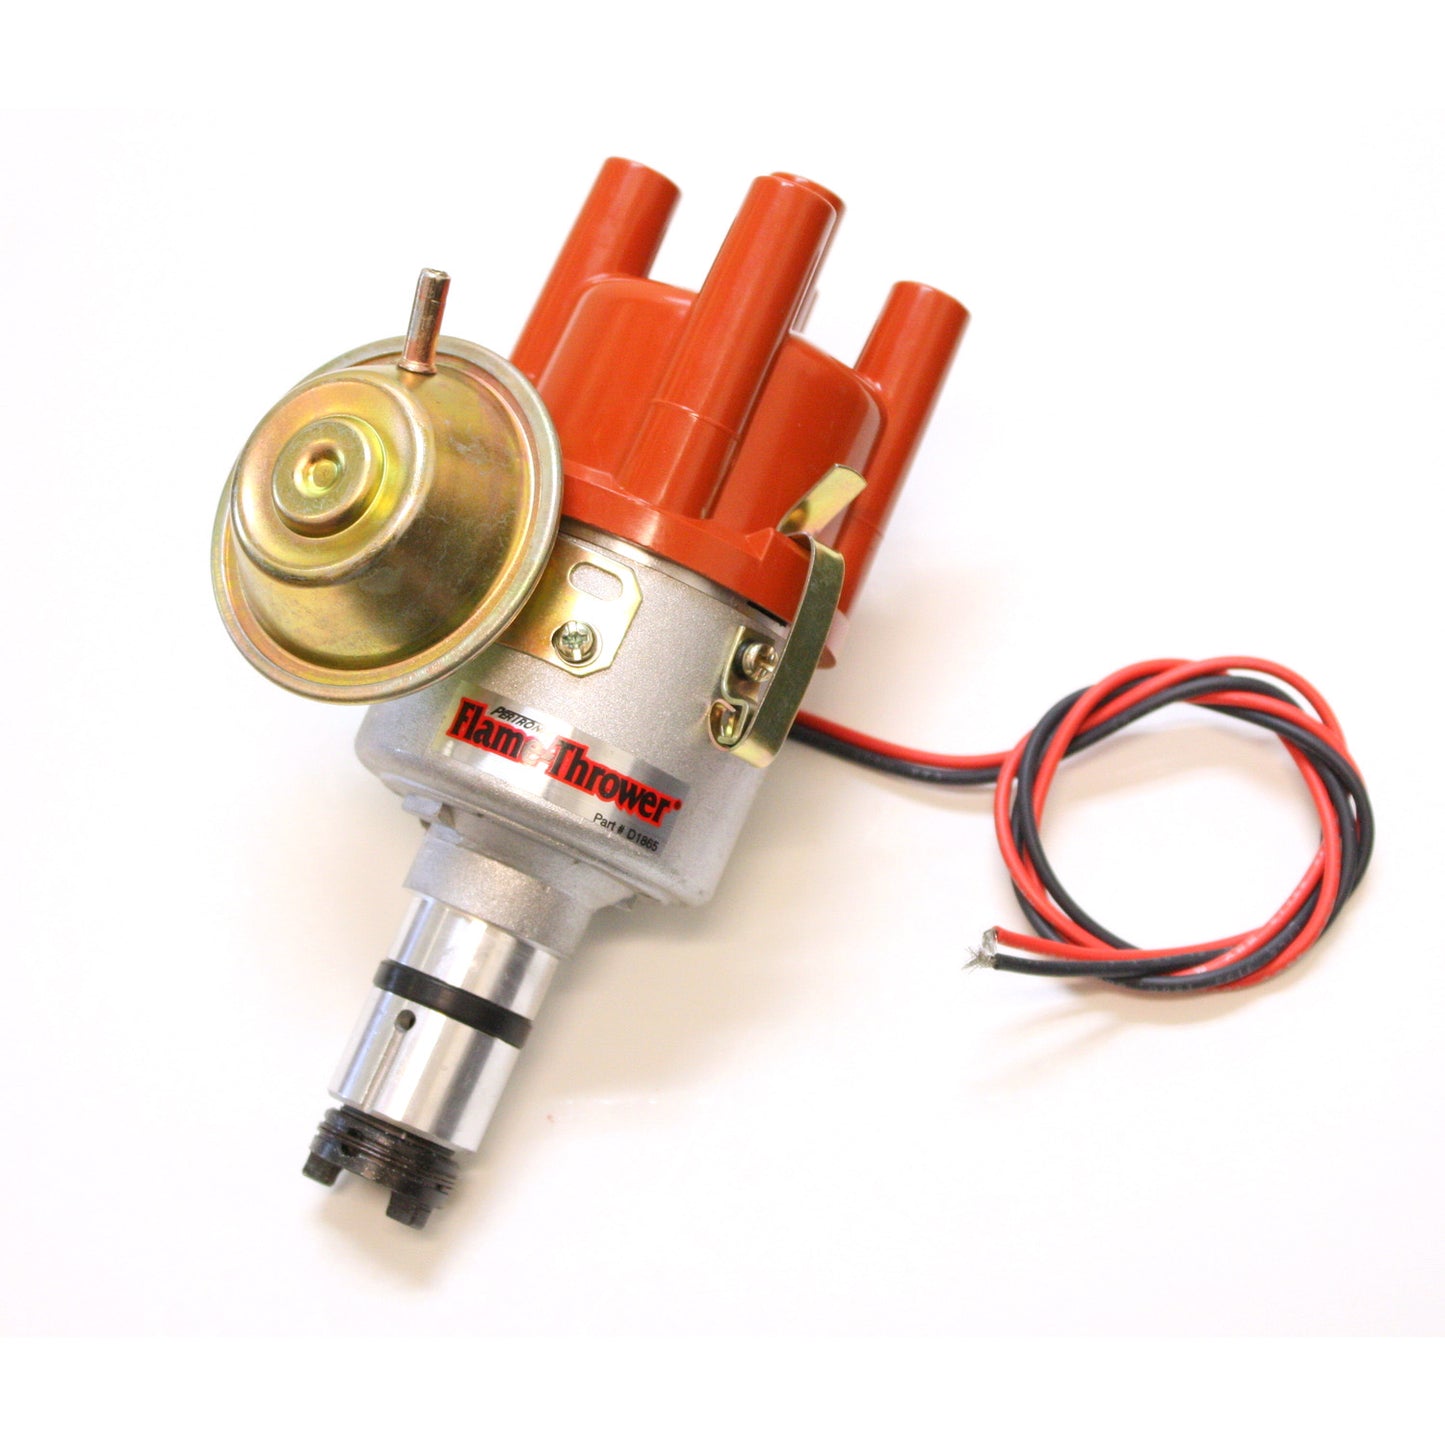 PerTronix D182504 Flame-Thrower Electronic Distributor Cast VW Type 1 Engine Plug and Play with Ignitor II Vacuum Advance